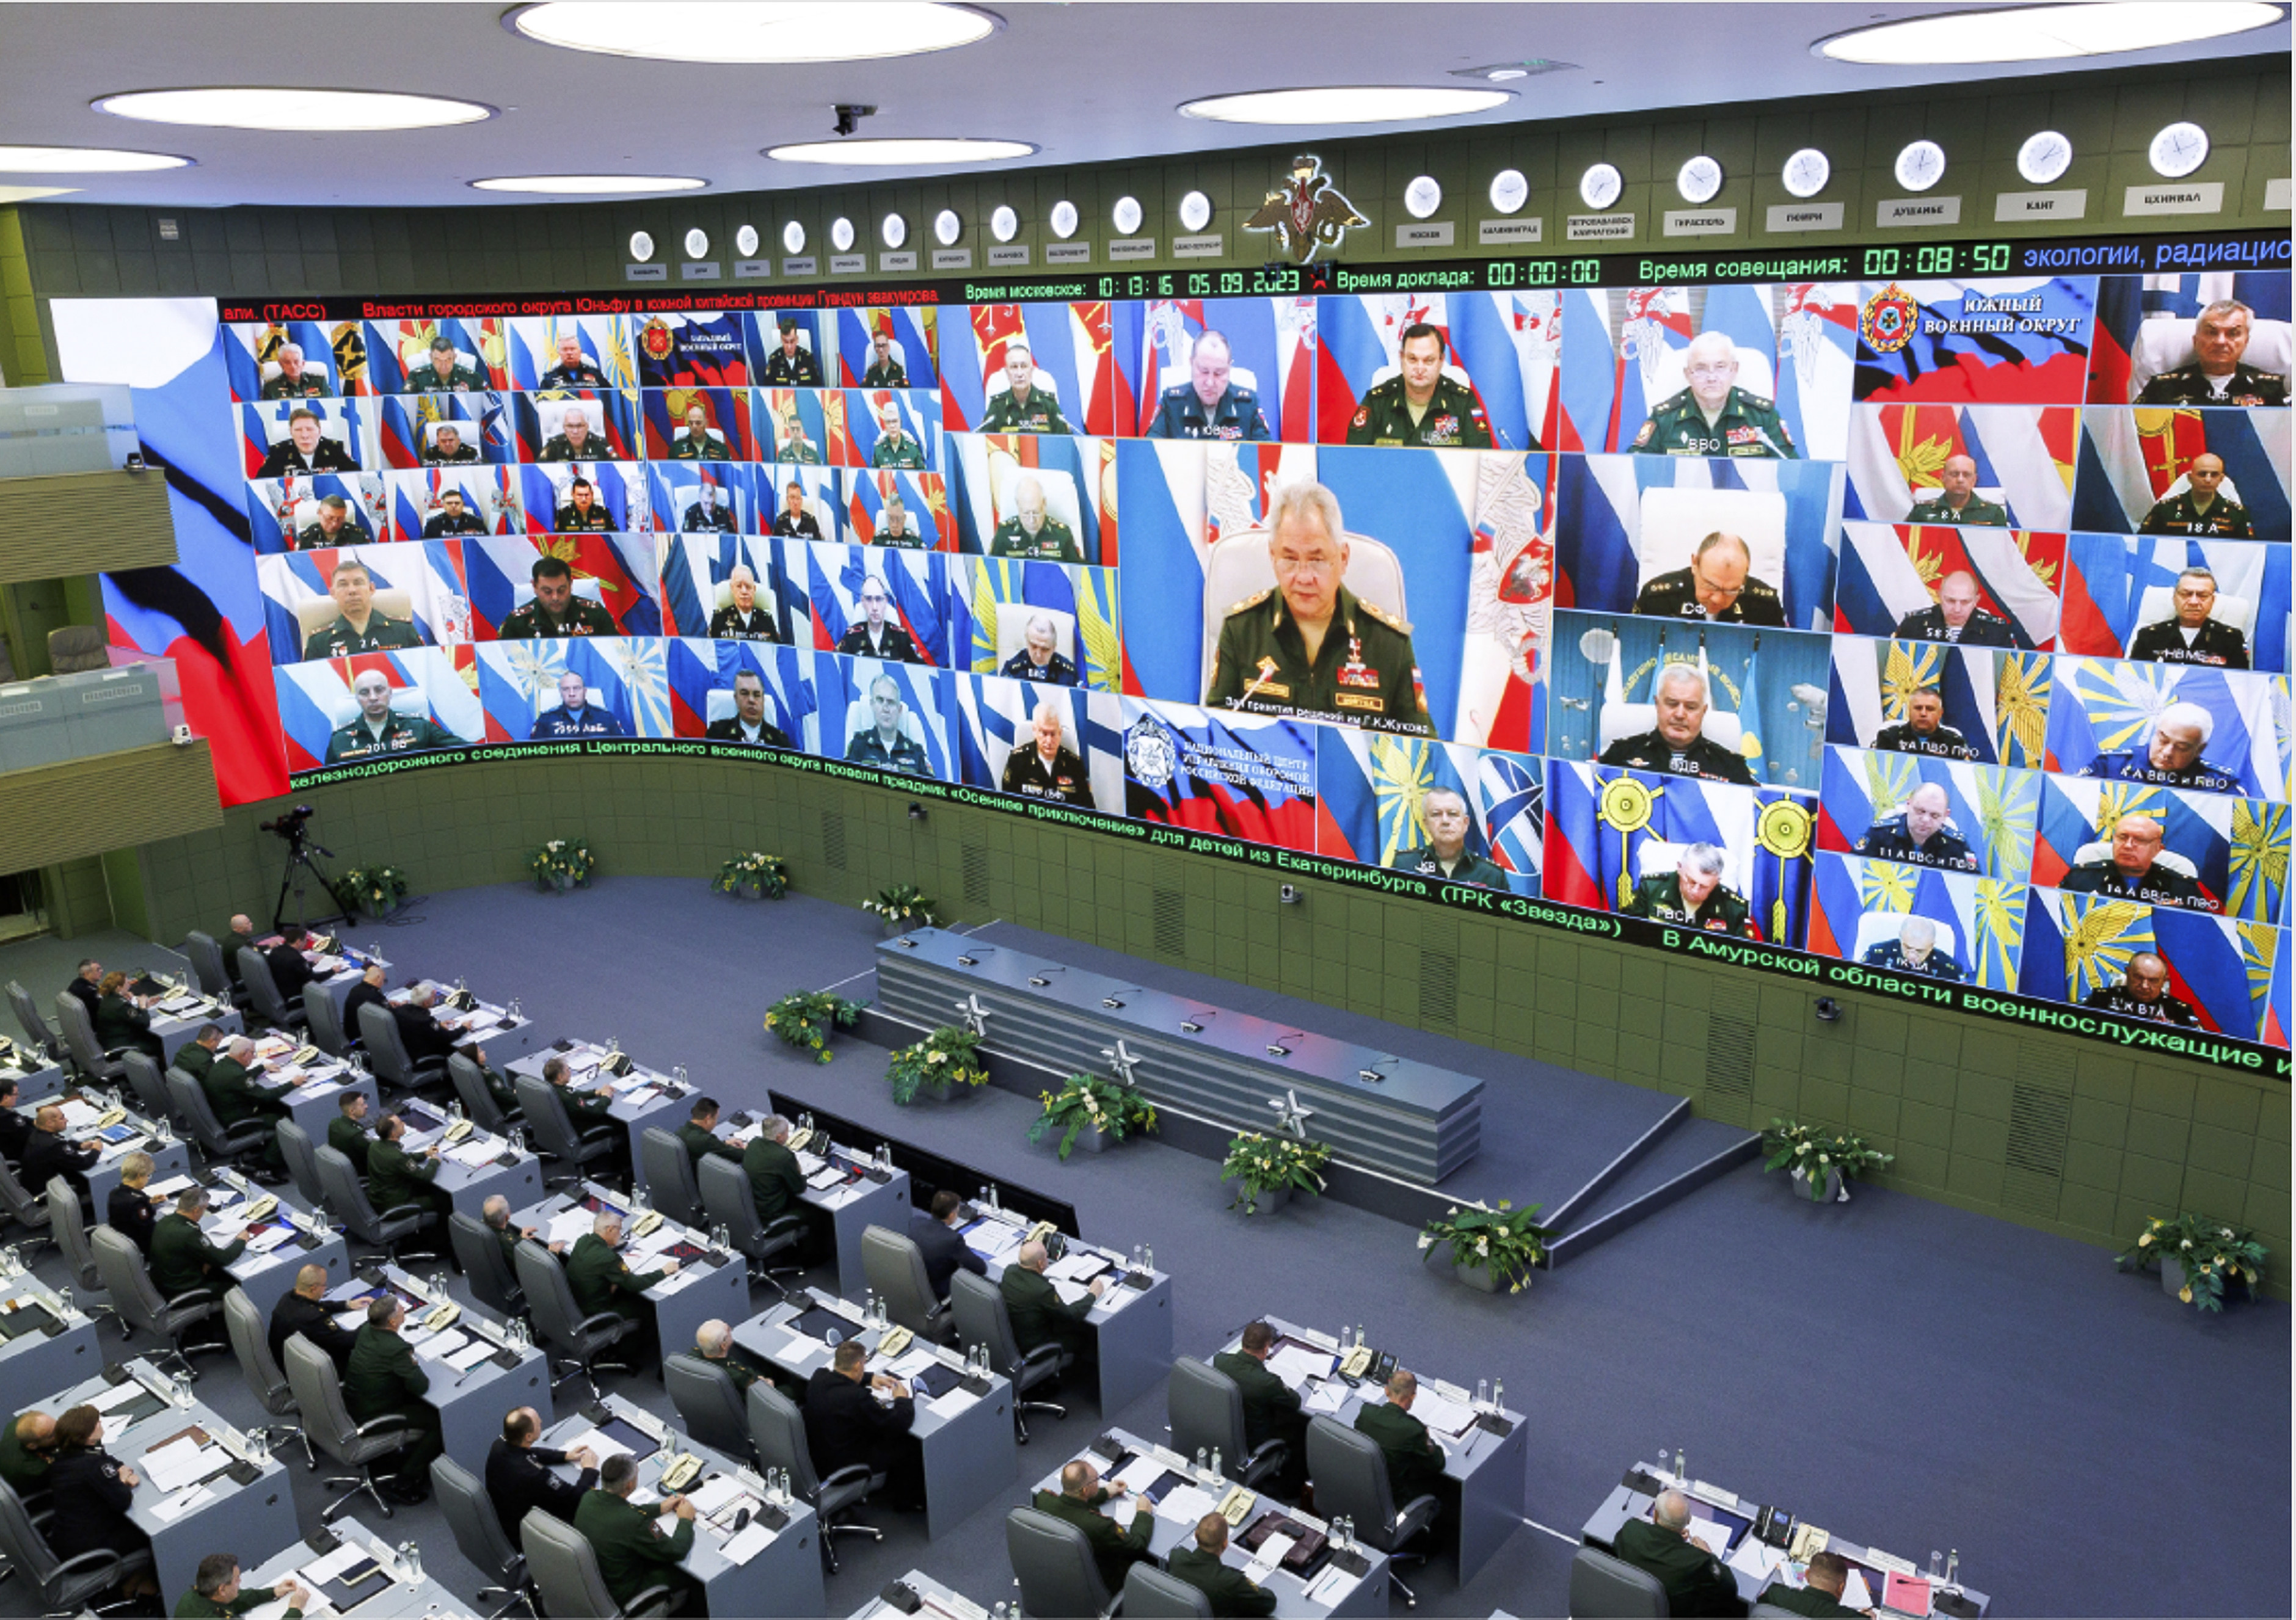 Russian Defence Minister Sergei Shoigu, seen on the screen, during a high level military meeting in Moscow. Photo: Russian Defence Ministry via AP